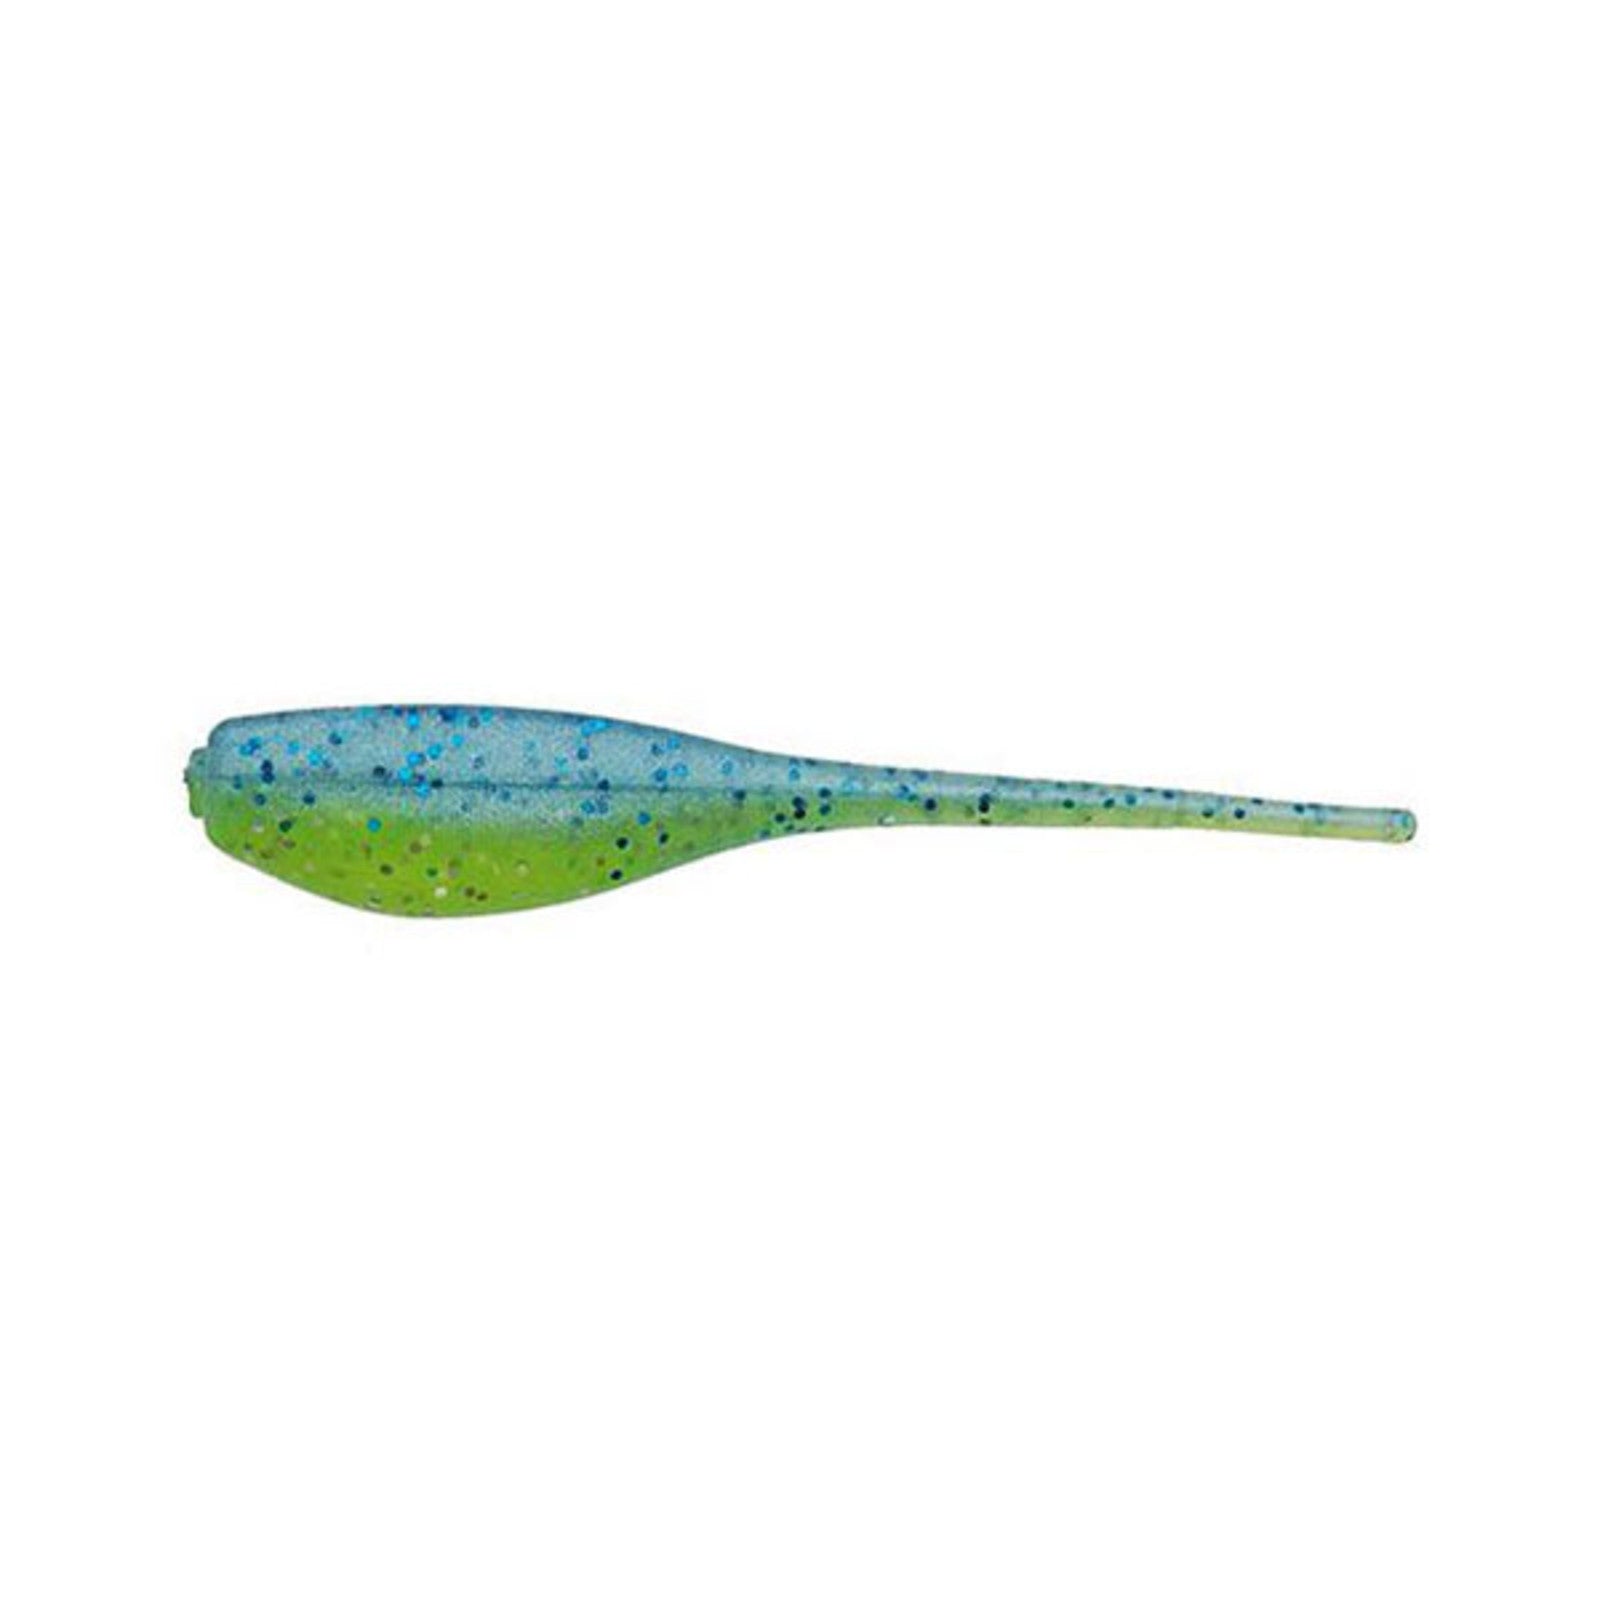 2 - Bobby Garland Crappie Baits - Baby Shad - 2 - 18/Pk - CLEARANCE!